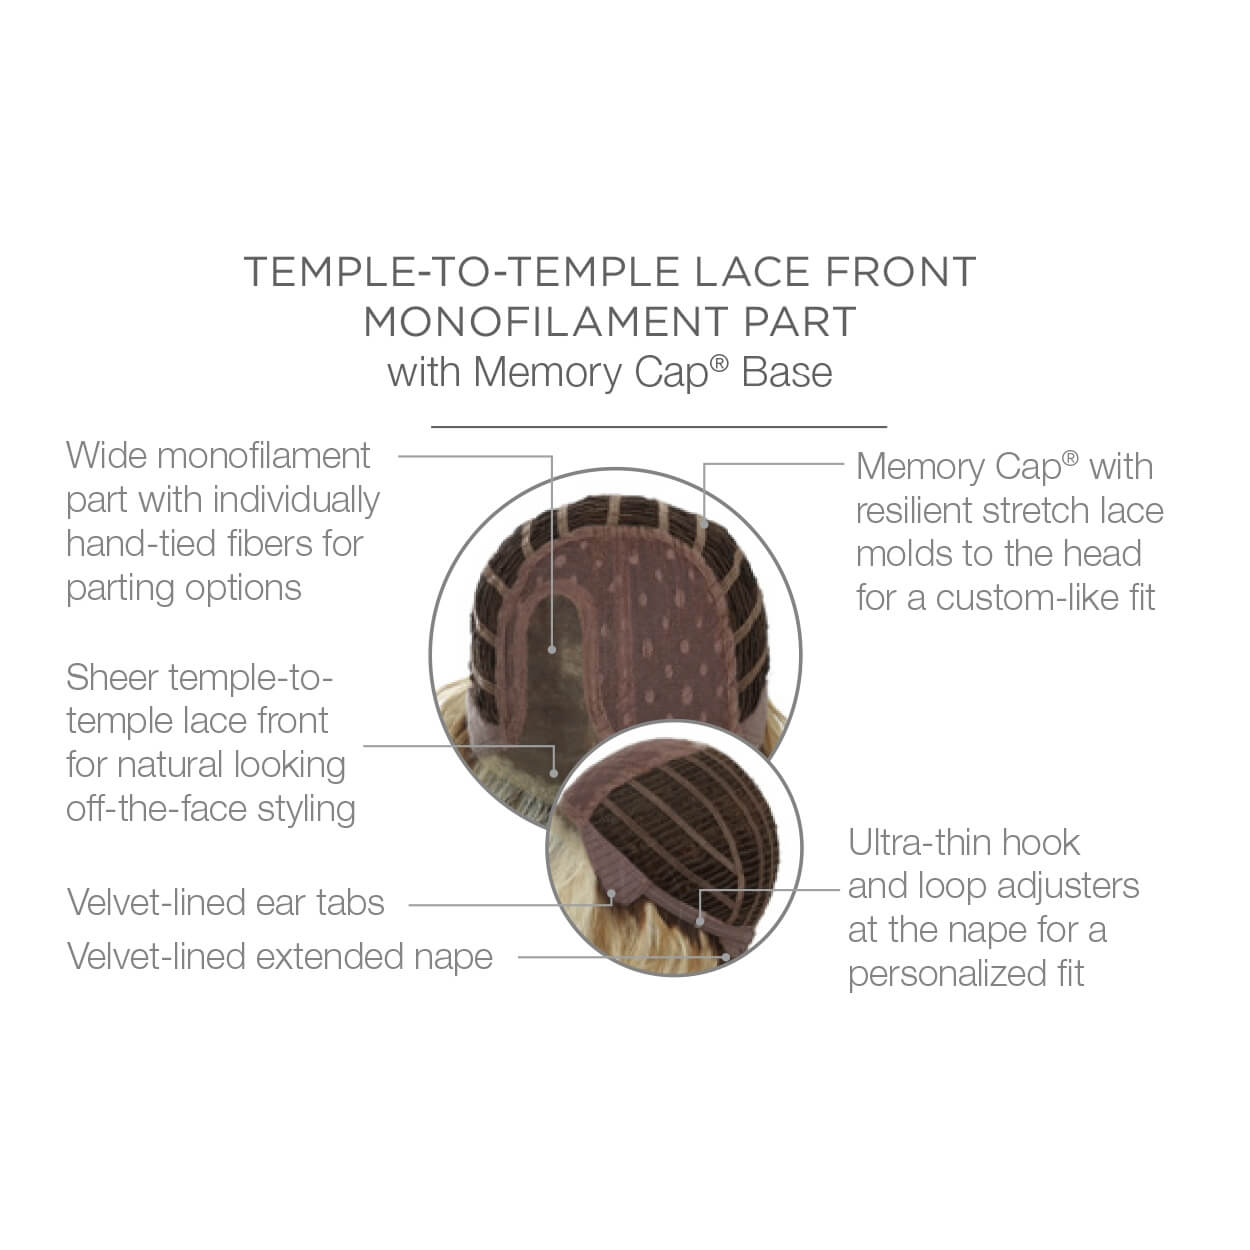 Temple to temple lace front monofilament part with Memory Cap Base